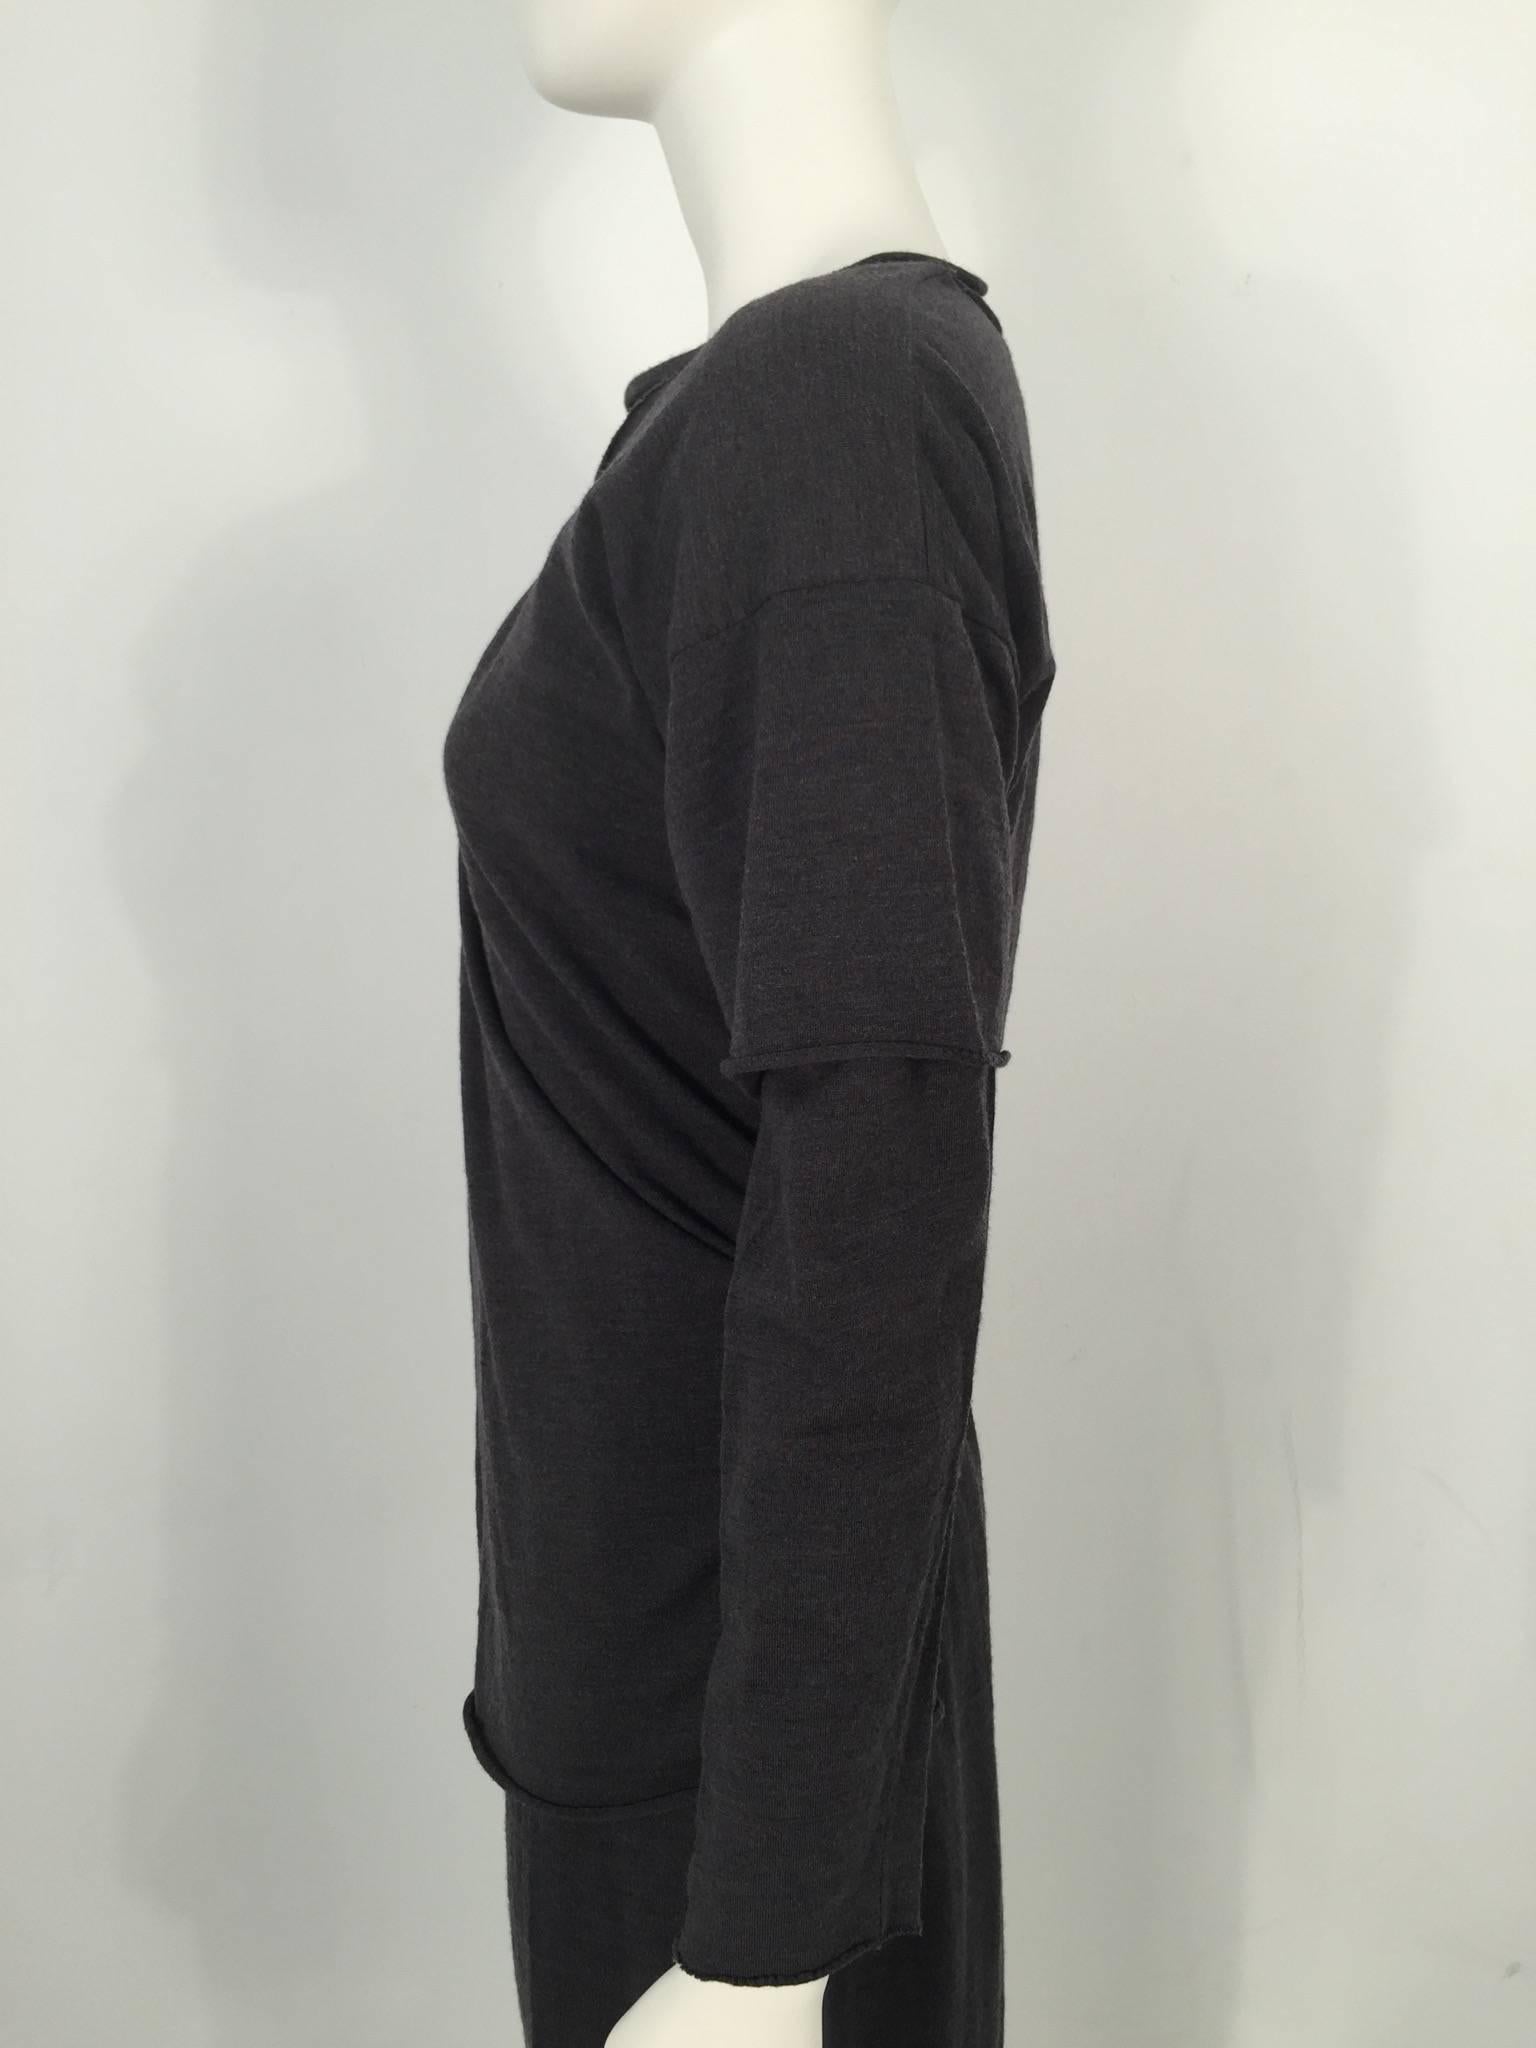 Comme des Garcons tricot Iconic Deconstructed Dress In Excellent Condition For Sale In New York, NY